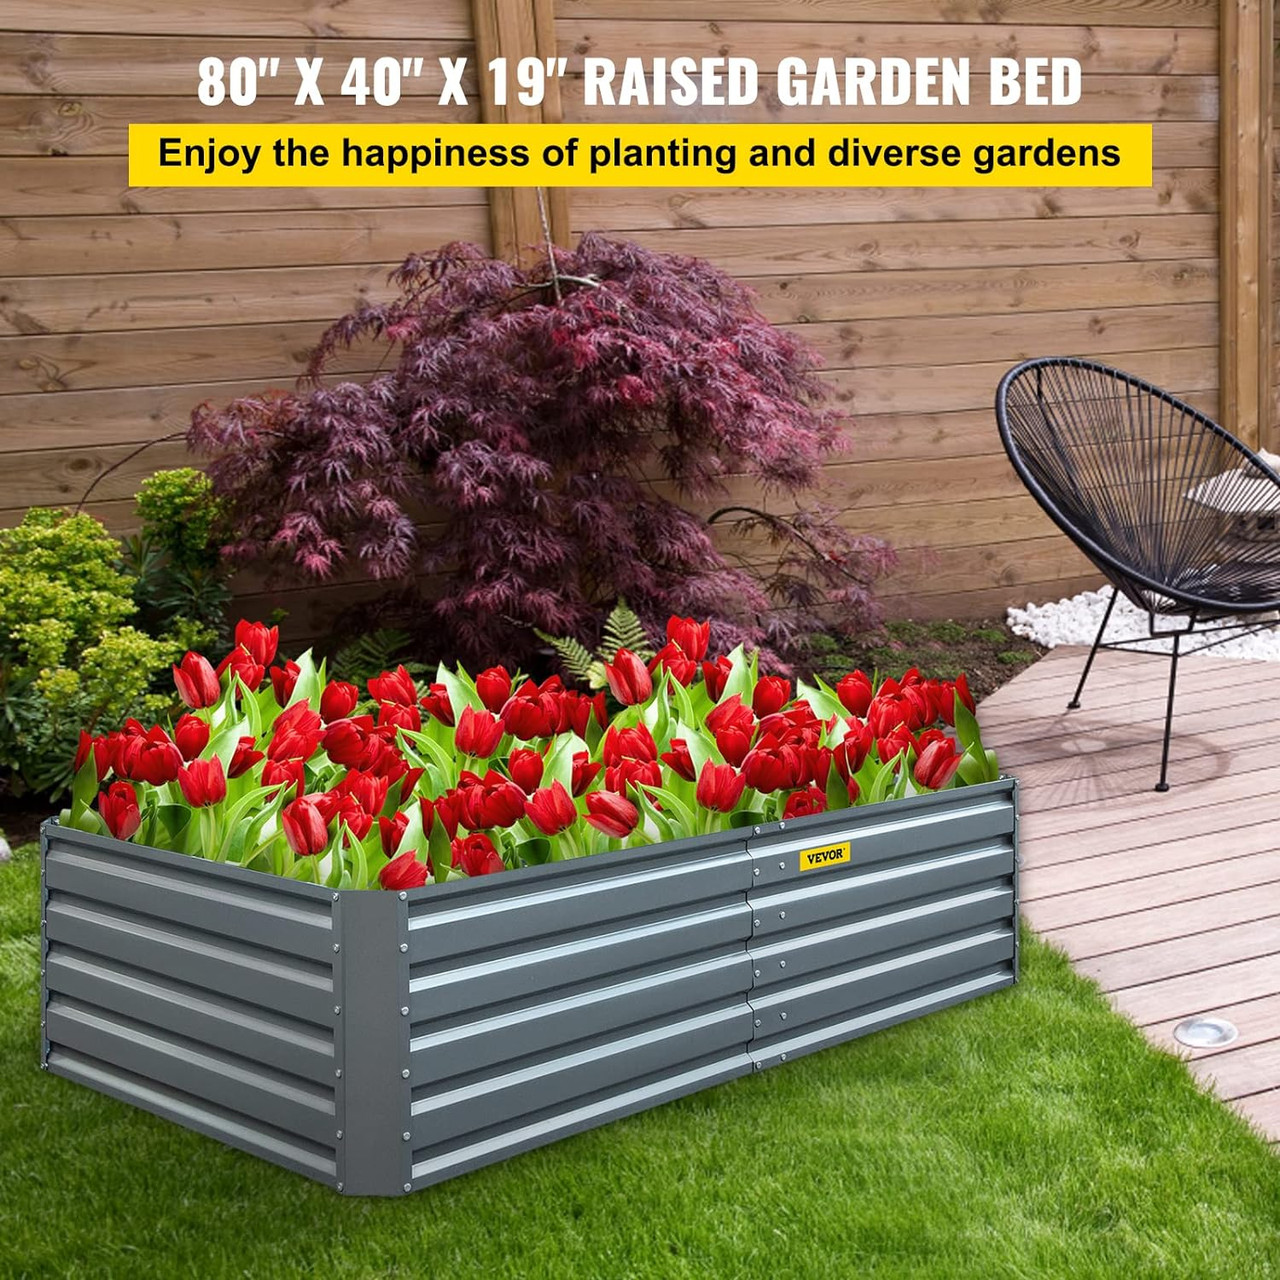 Galvanized Raised Garden Bed, 80" x 40" x 19" Metal Planter Box, Gray Steel Plant Raised Garden Bed Kit, Planter Boxes Outdoor for Growing